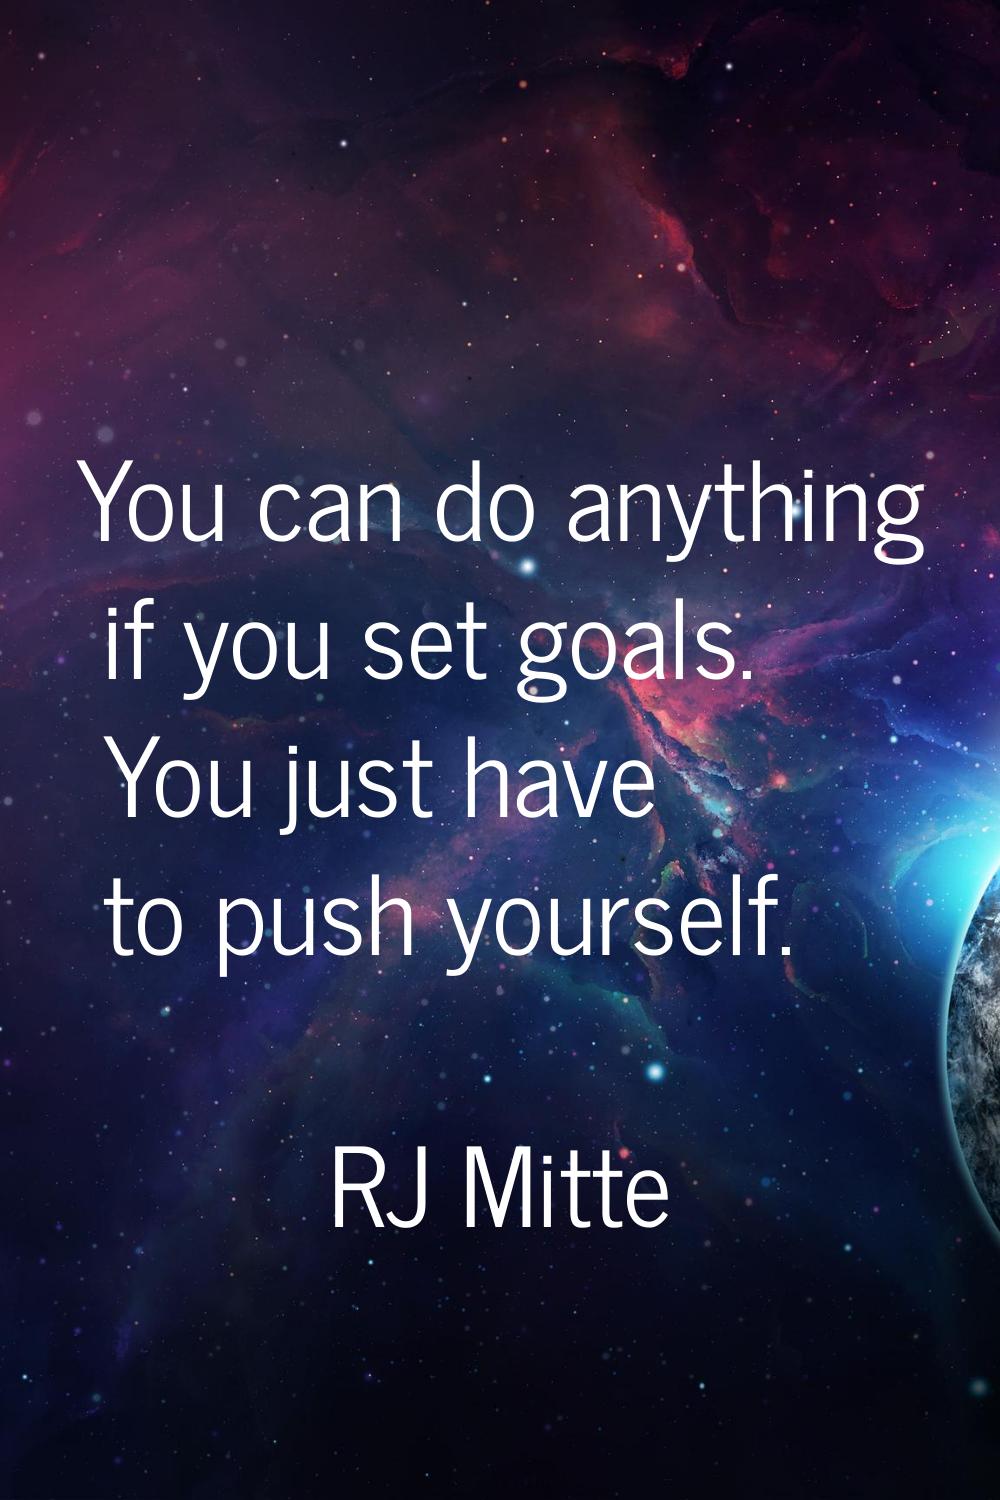 You can do anything if you set goals. You just have to push yourself.